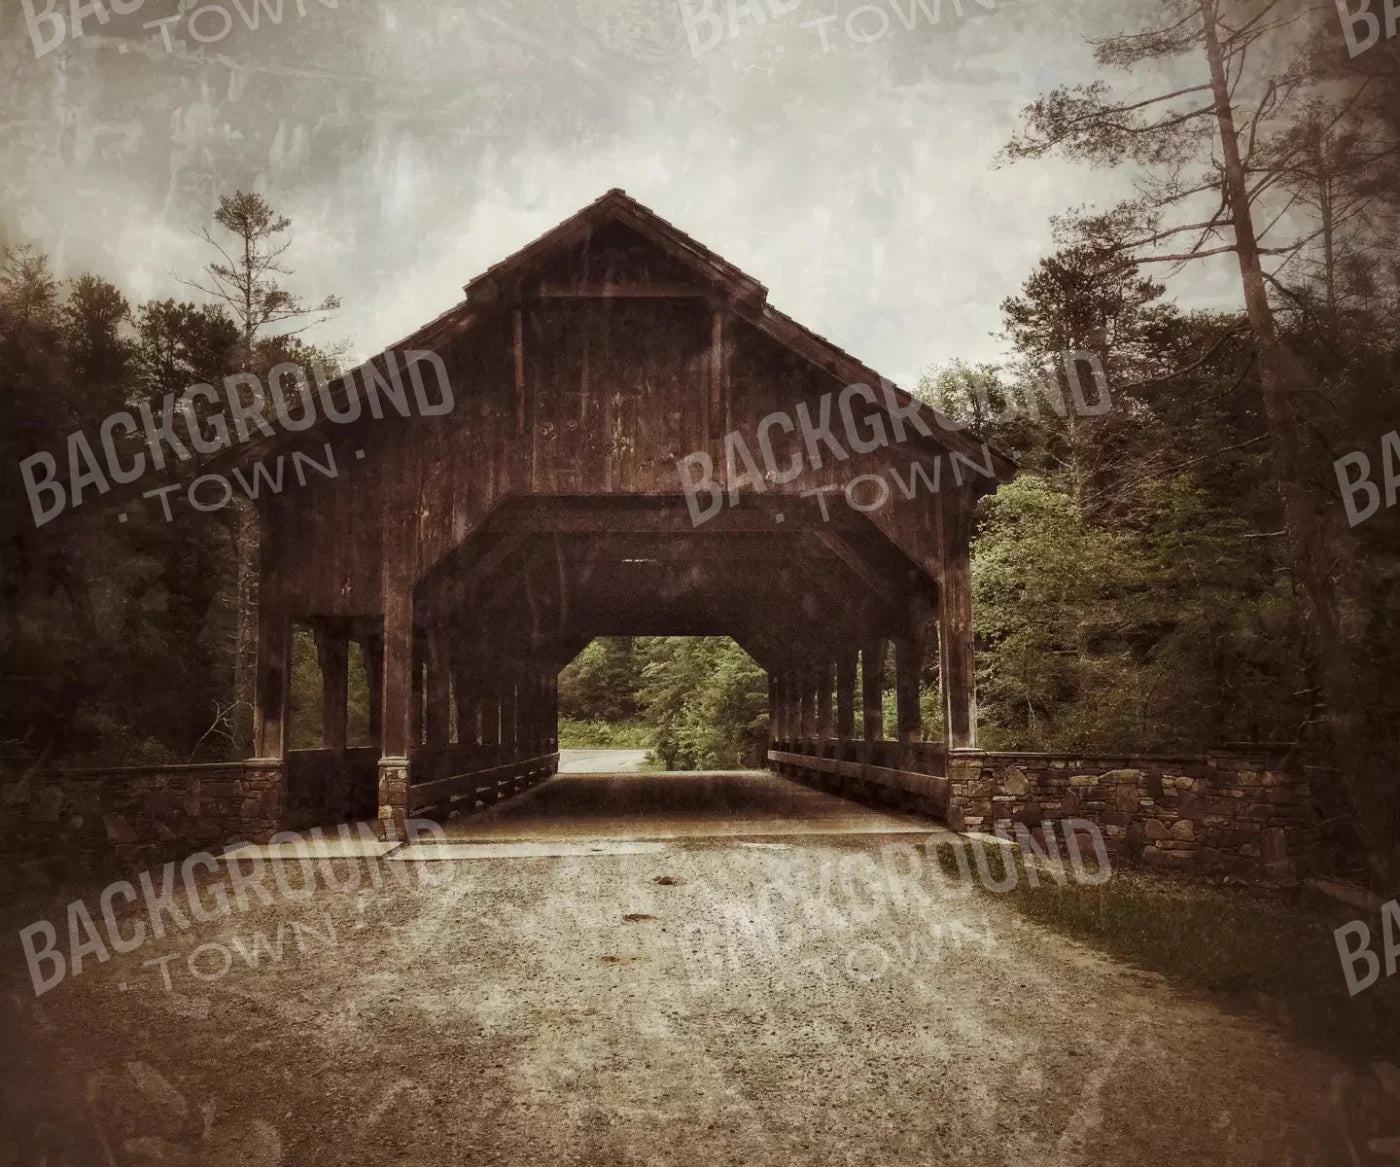 Rustic covered bridge Backdrop for Photography